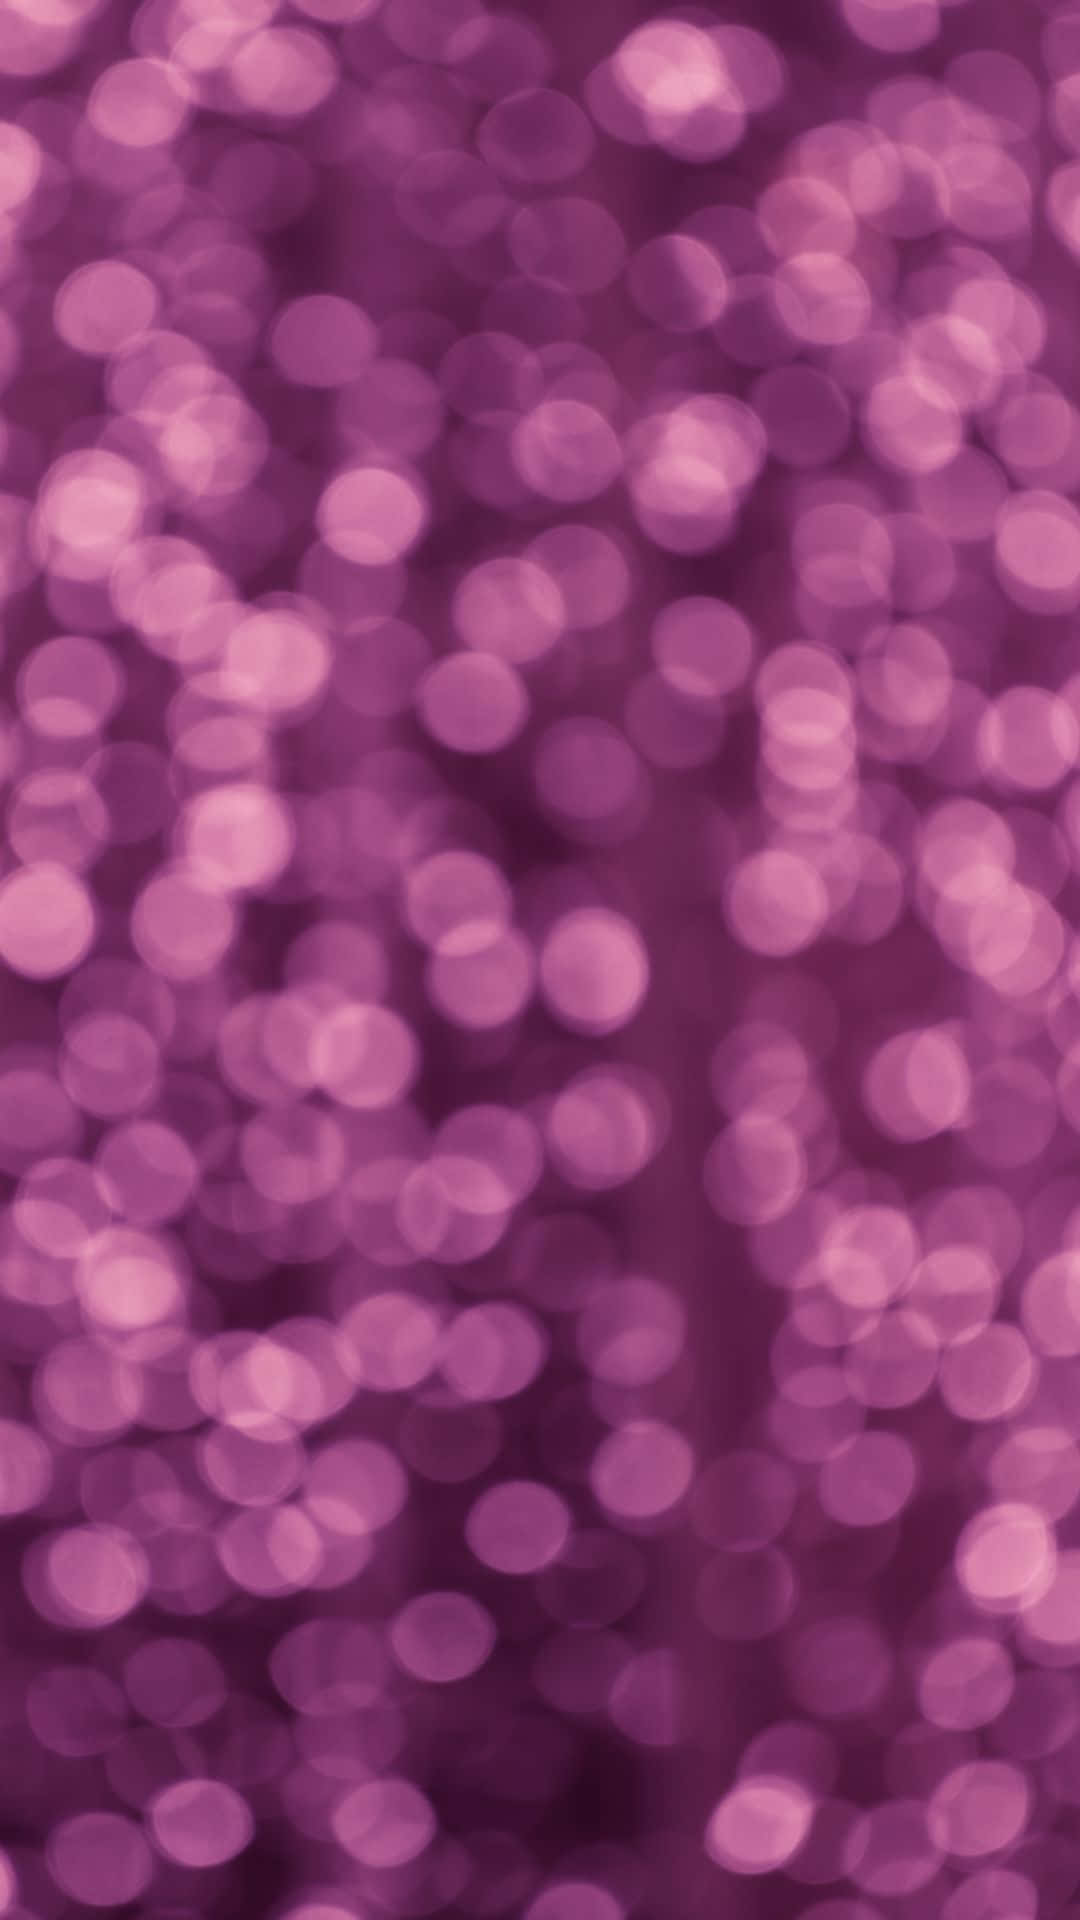 Purple Bokeh Background With Circles